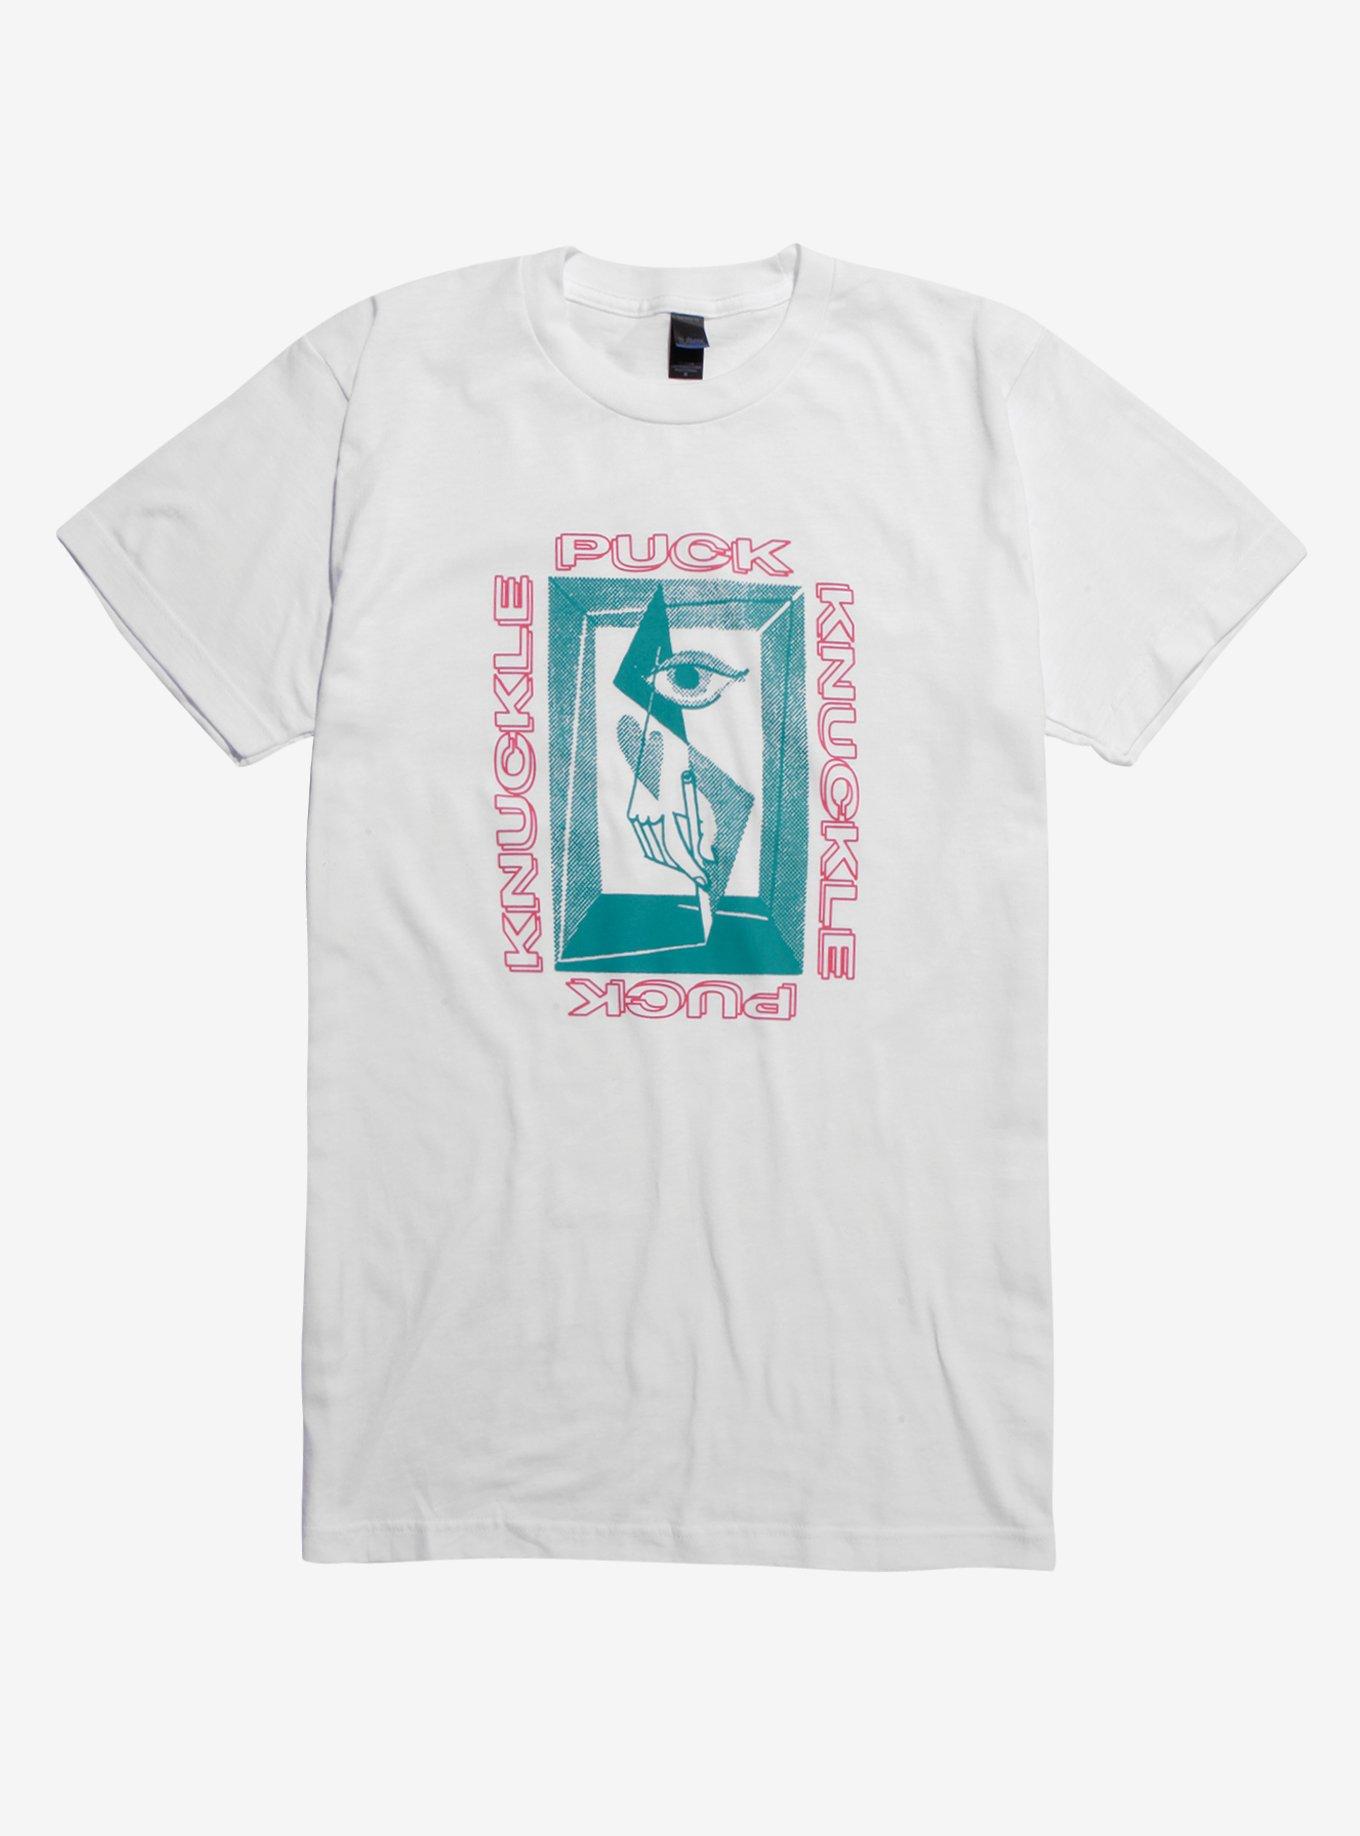 Knuckle Puck Drawing Hand T-Shirt, WHITE, hi-res